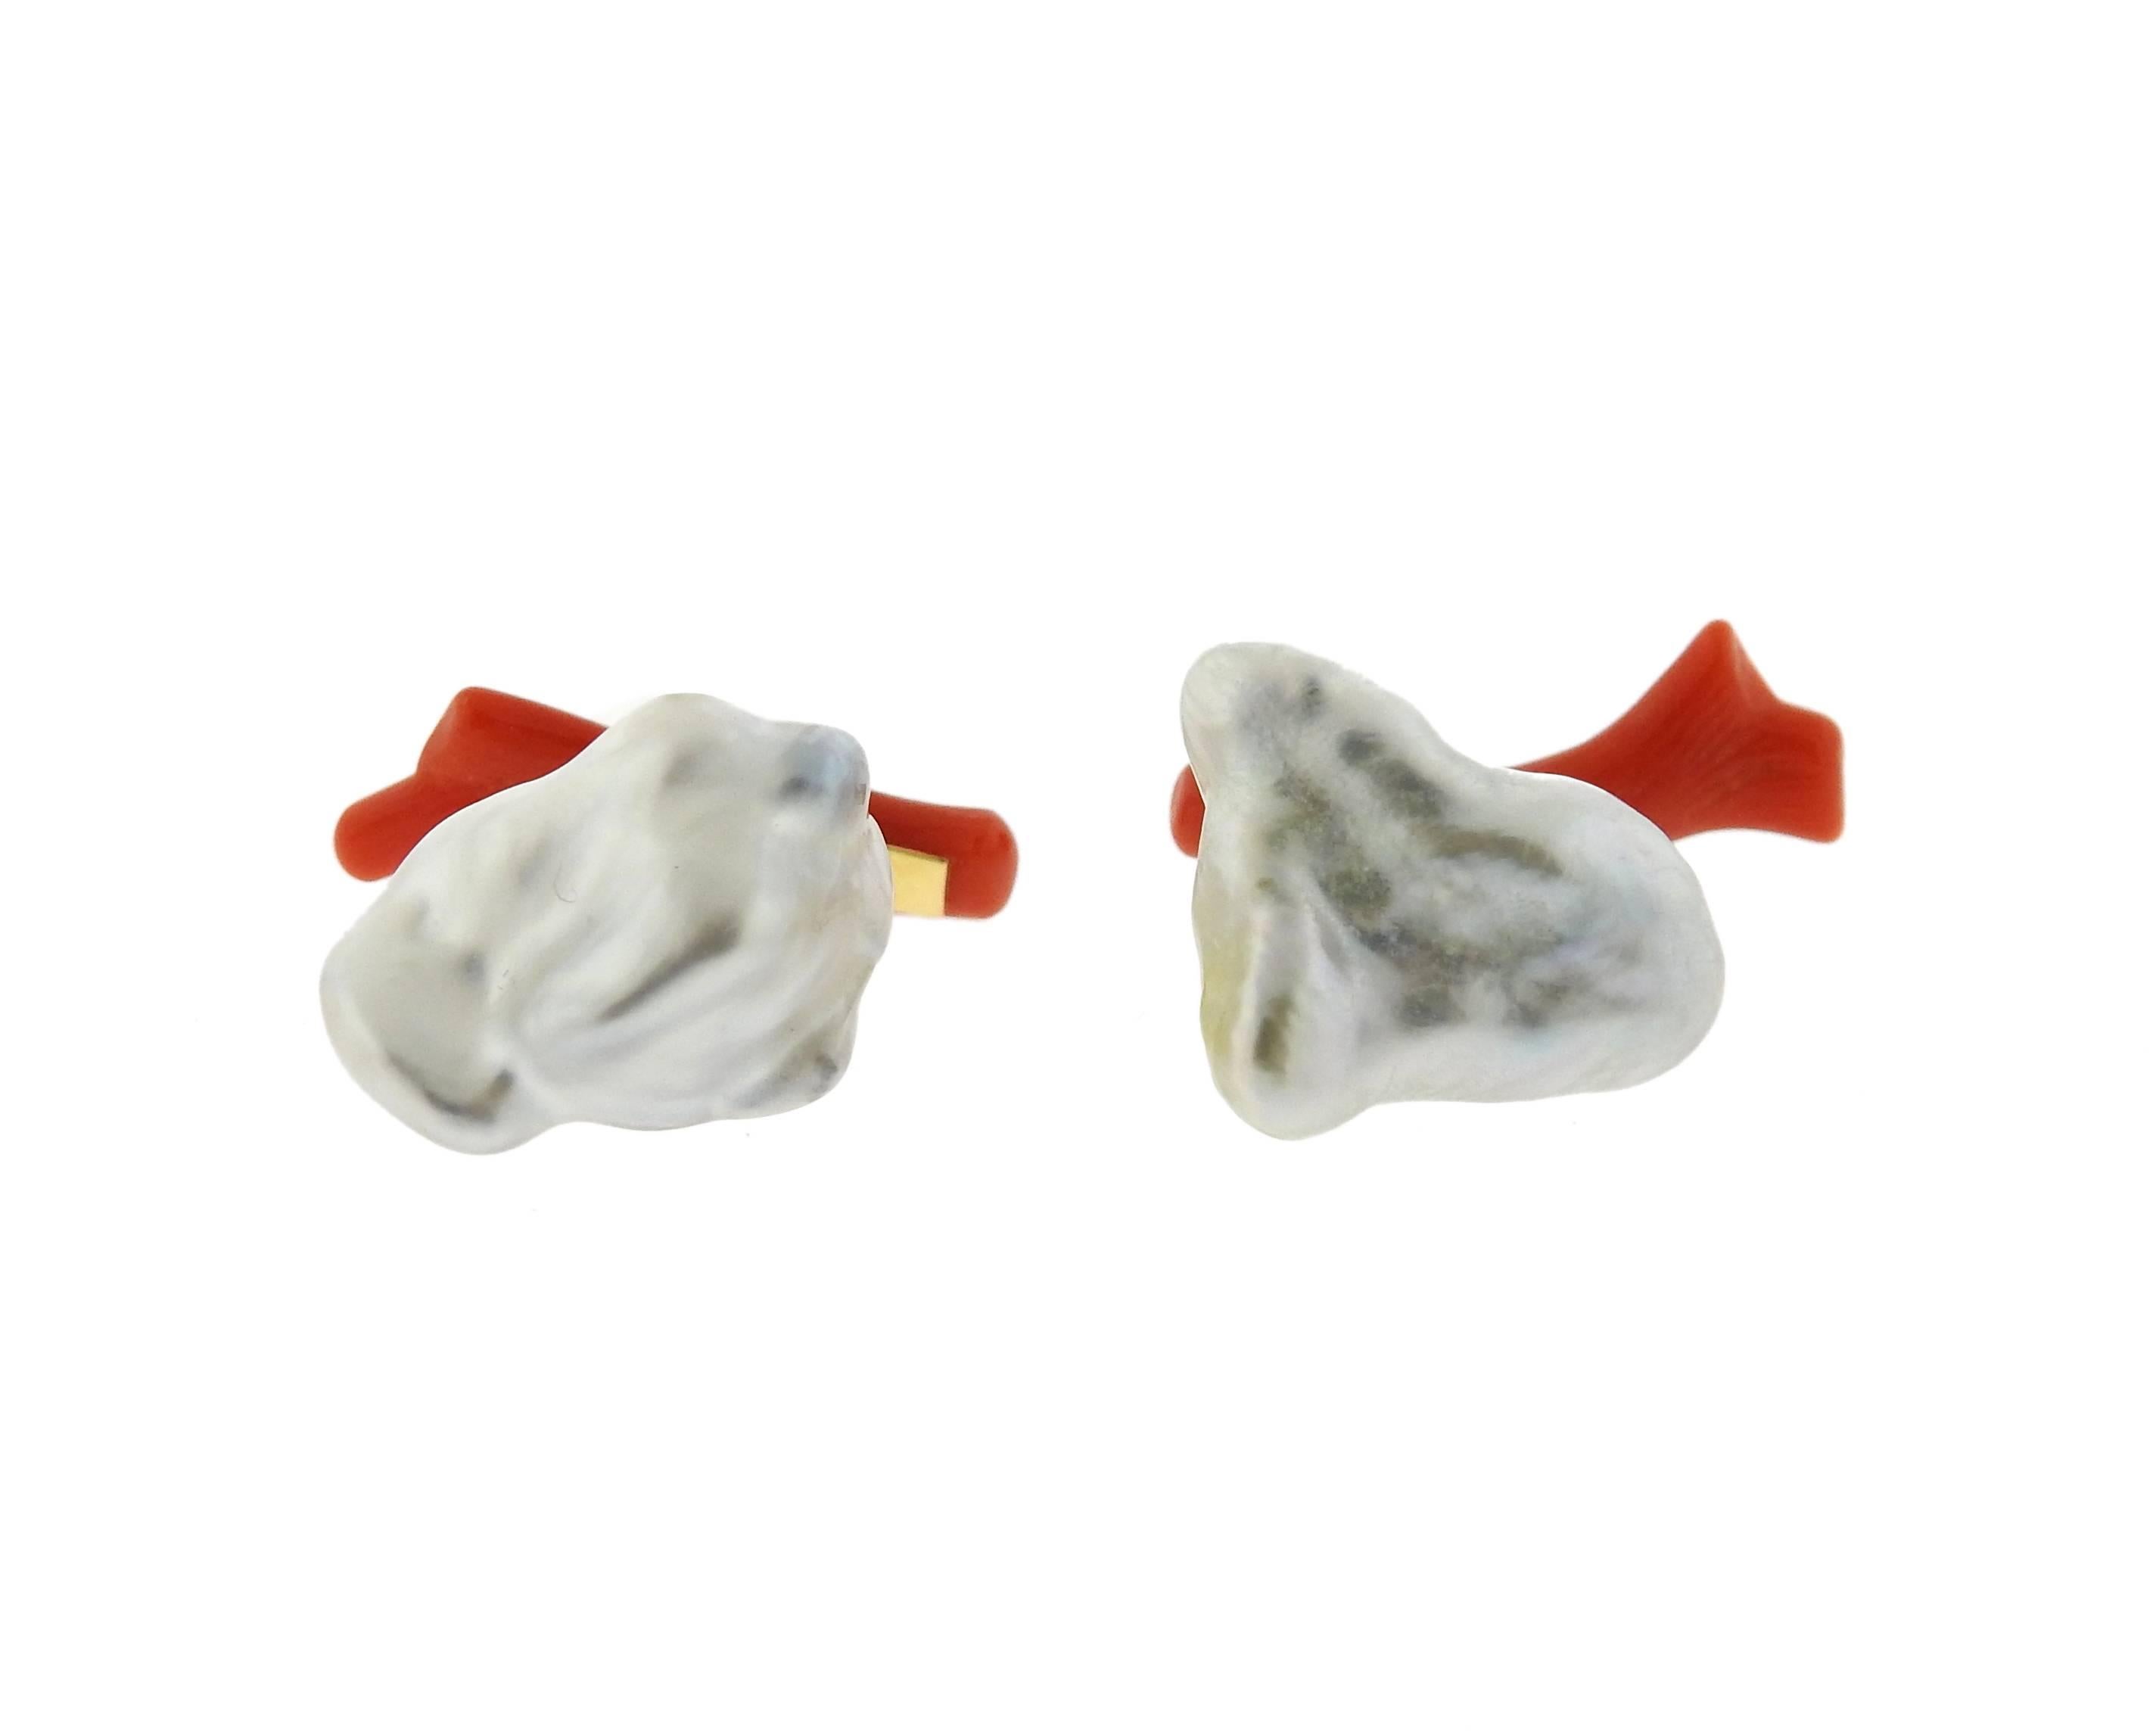 18K Gold Trianon cufflinks feature pearls and coral. Pearl tops measure 16mm x 11mm. Coral measure 21mm x 6mm. Marked: 2008, 1998, Trianon Mark, 750. Weight: 5.8 grams. 